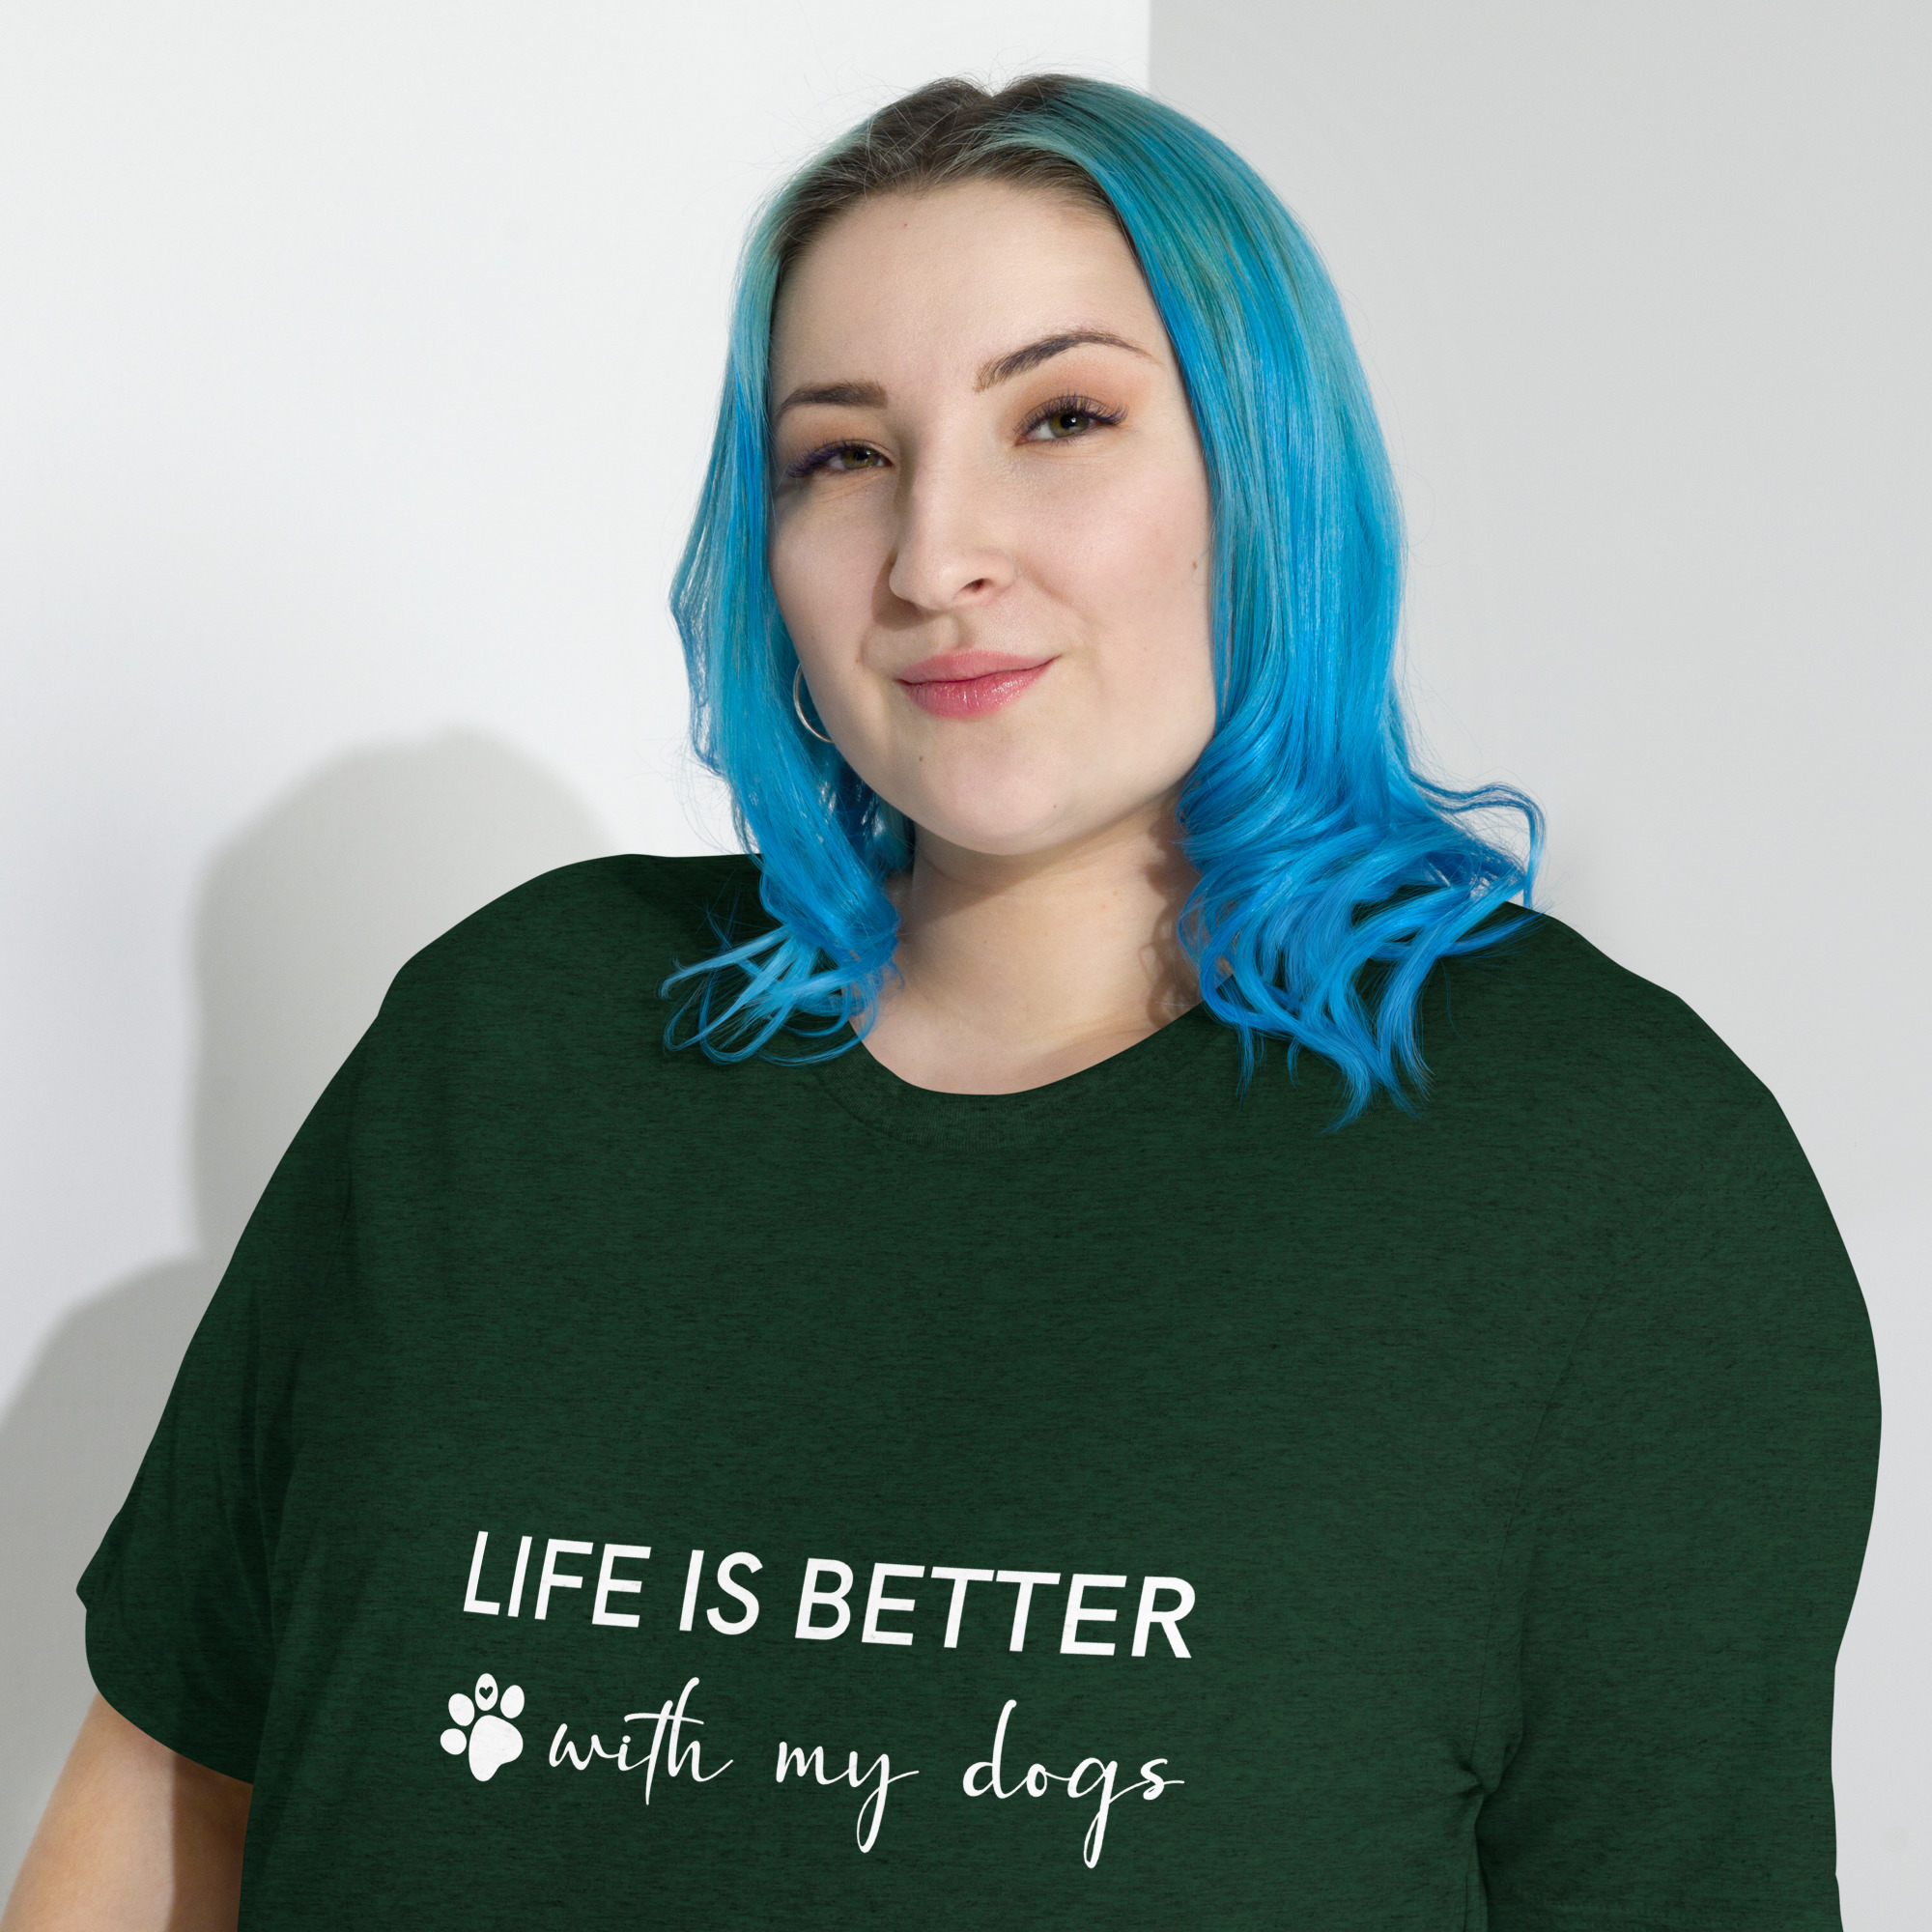 “life is better with my dogs” women’s short sleeve t shirt